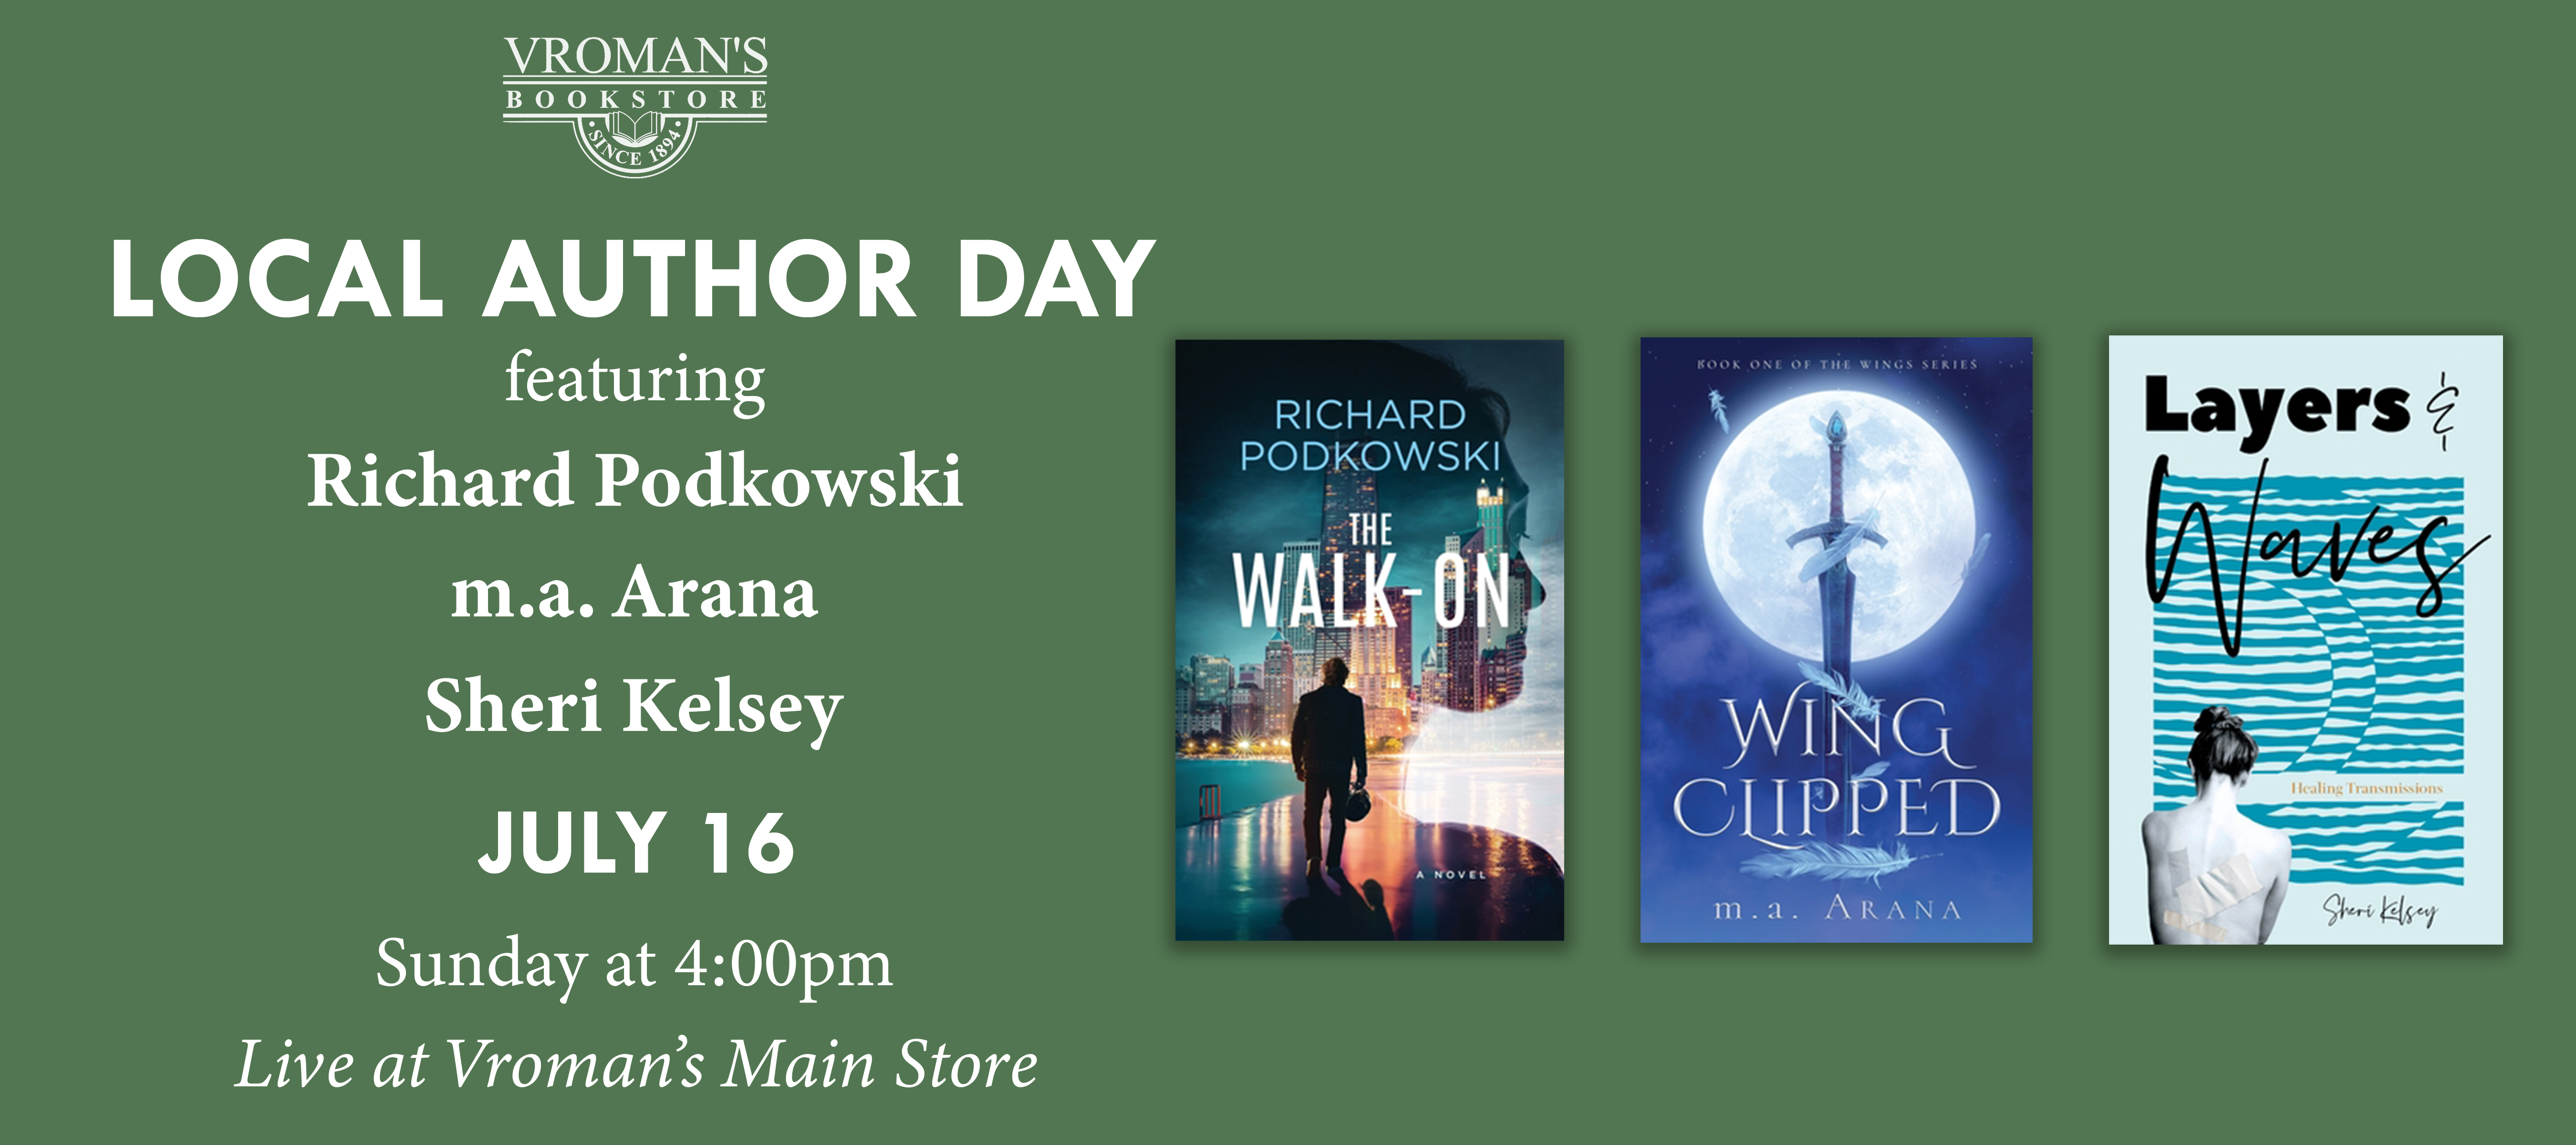 Vroman’s Local Author Day featuring Richard Podkowski, m.a. Arana, and Sheri Kelsey